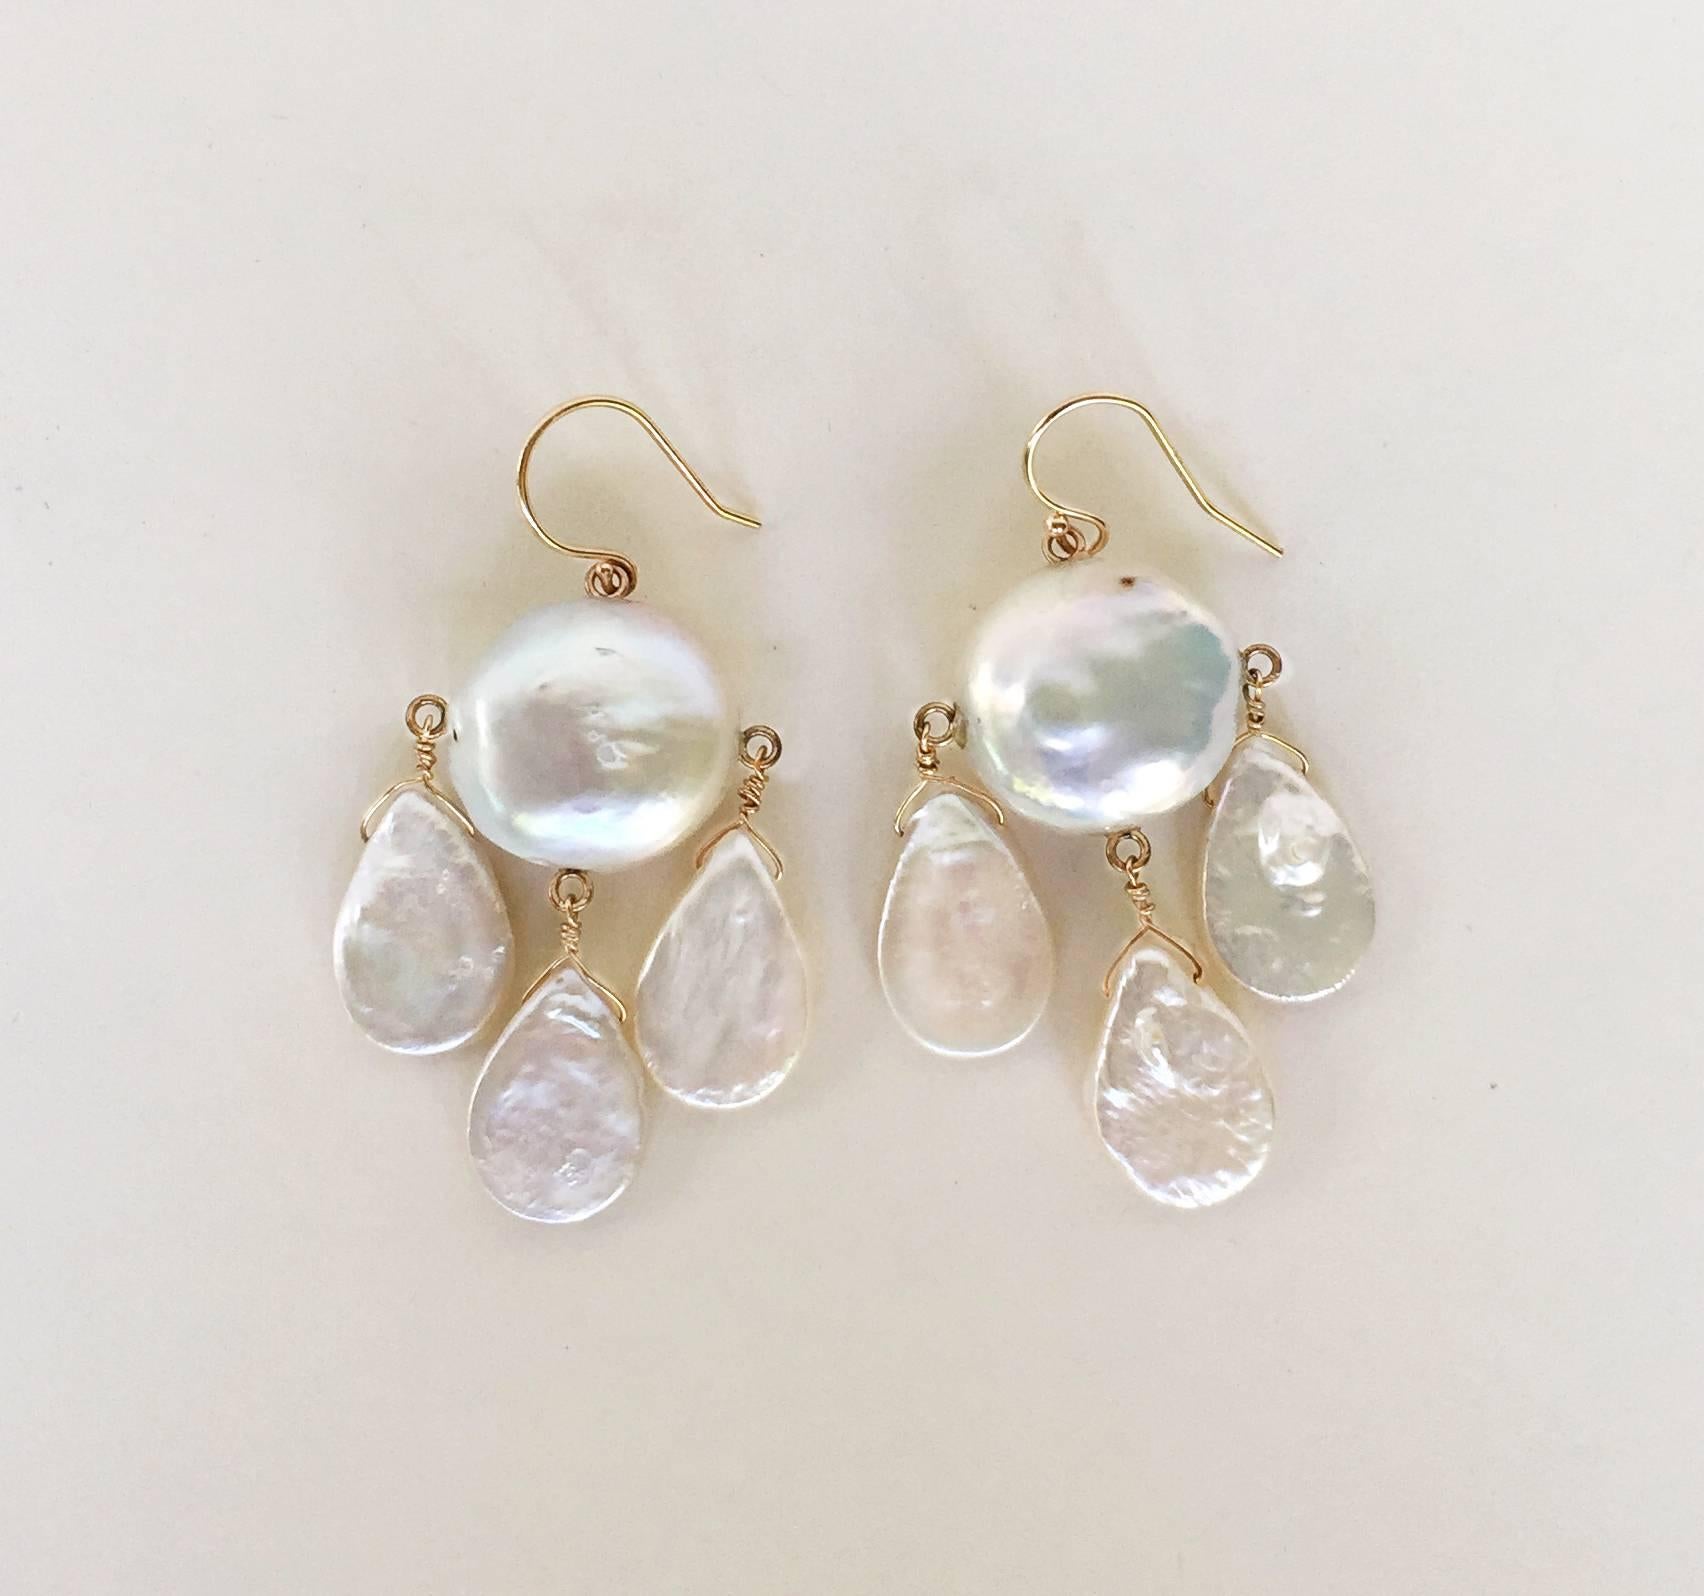 Women's Baroque Pearl Earrings with Three Drop Flat Pearls by Marina J